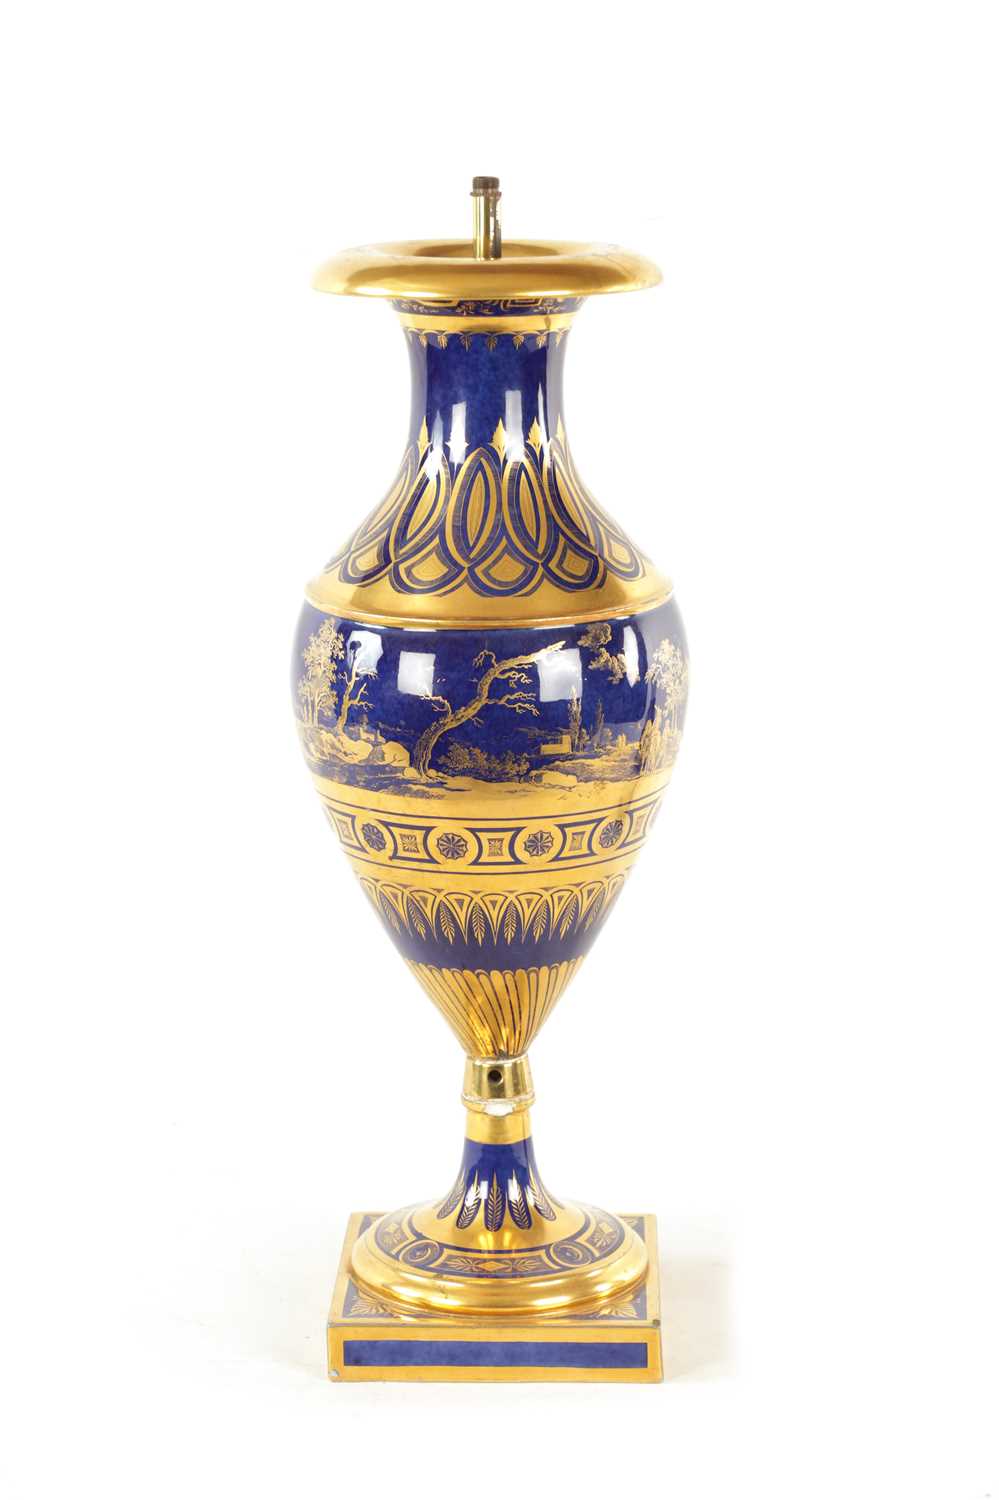 AN EARLY 19TH CENTURY FRENCH PARIS PORCELAIN ROYAL BLUE AND GILT URN SHAPED PEDESTAL VASE